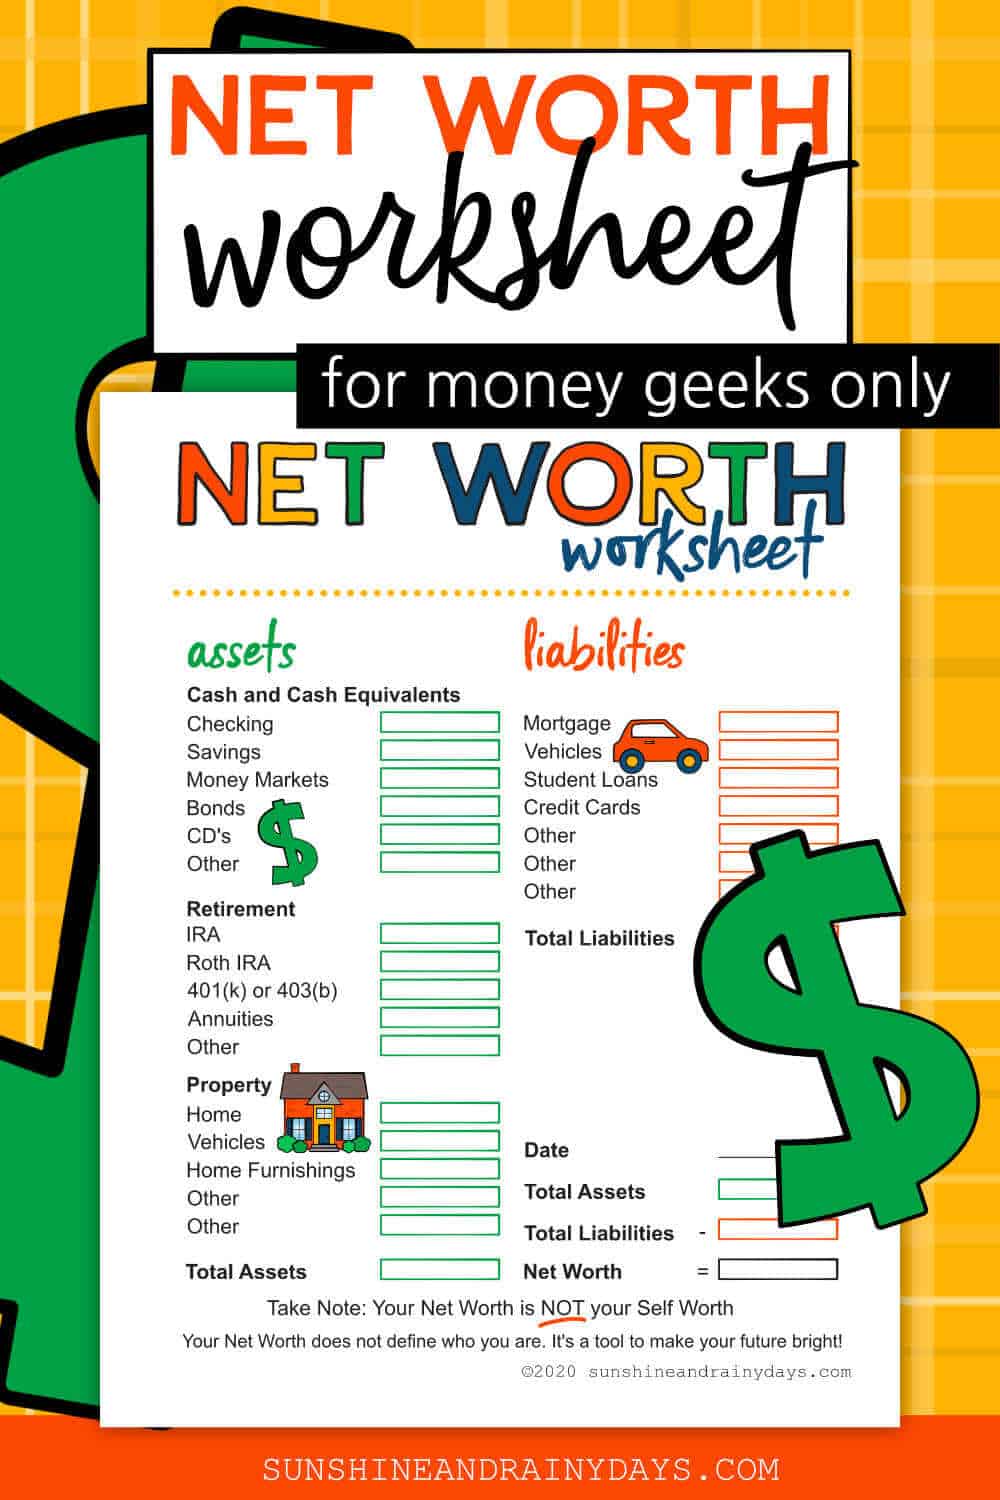 Net Worth Worksheet - Discover YOUR Net Worth - Sunshine and Rainy Intended For Personal Net Worth Worksheet